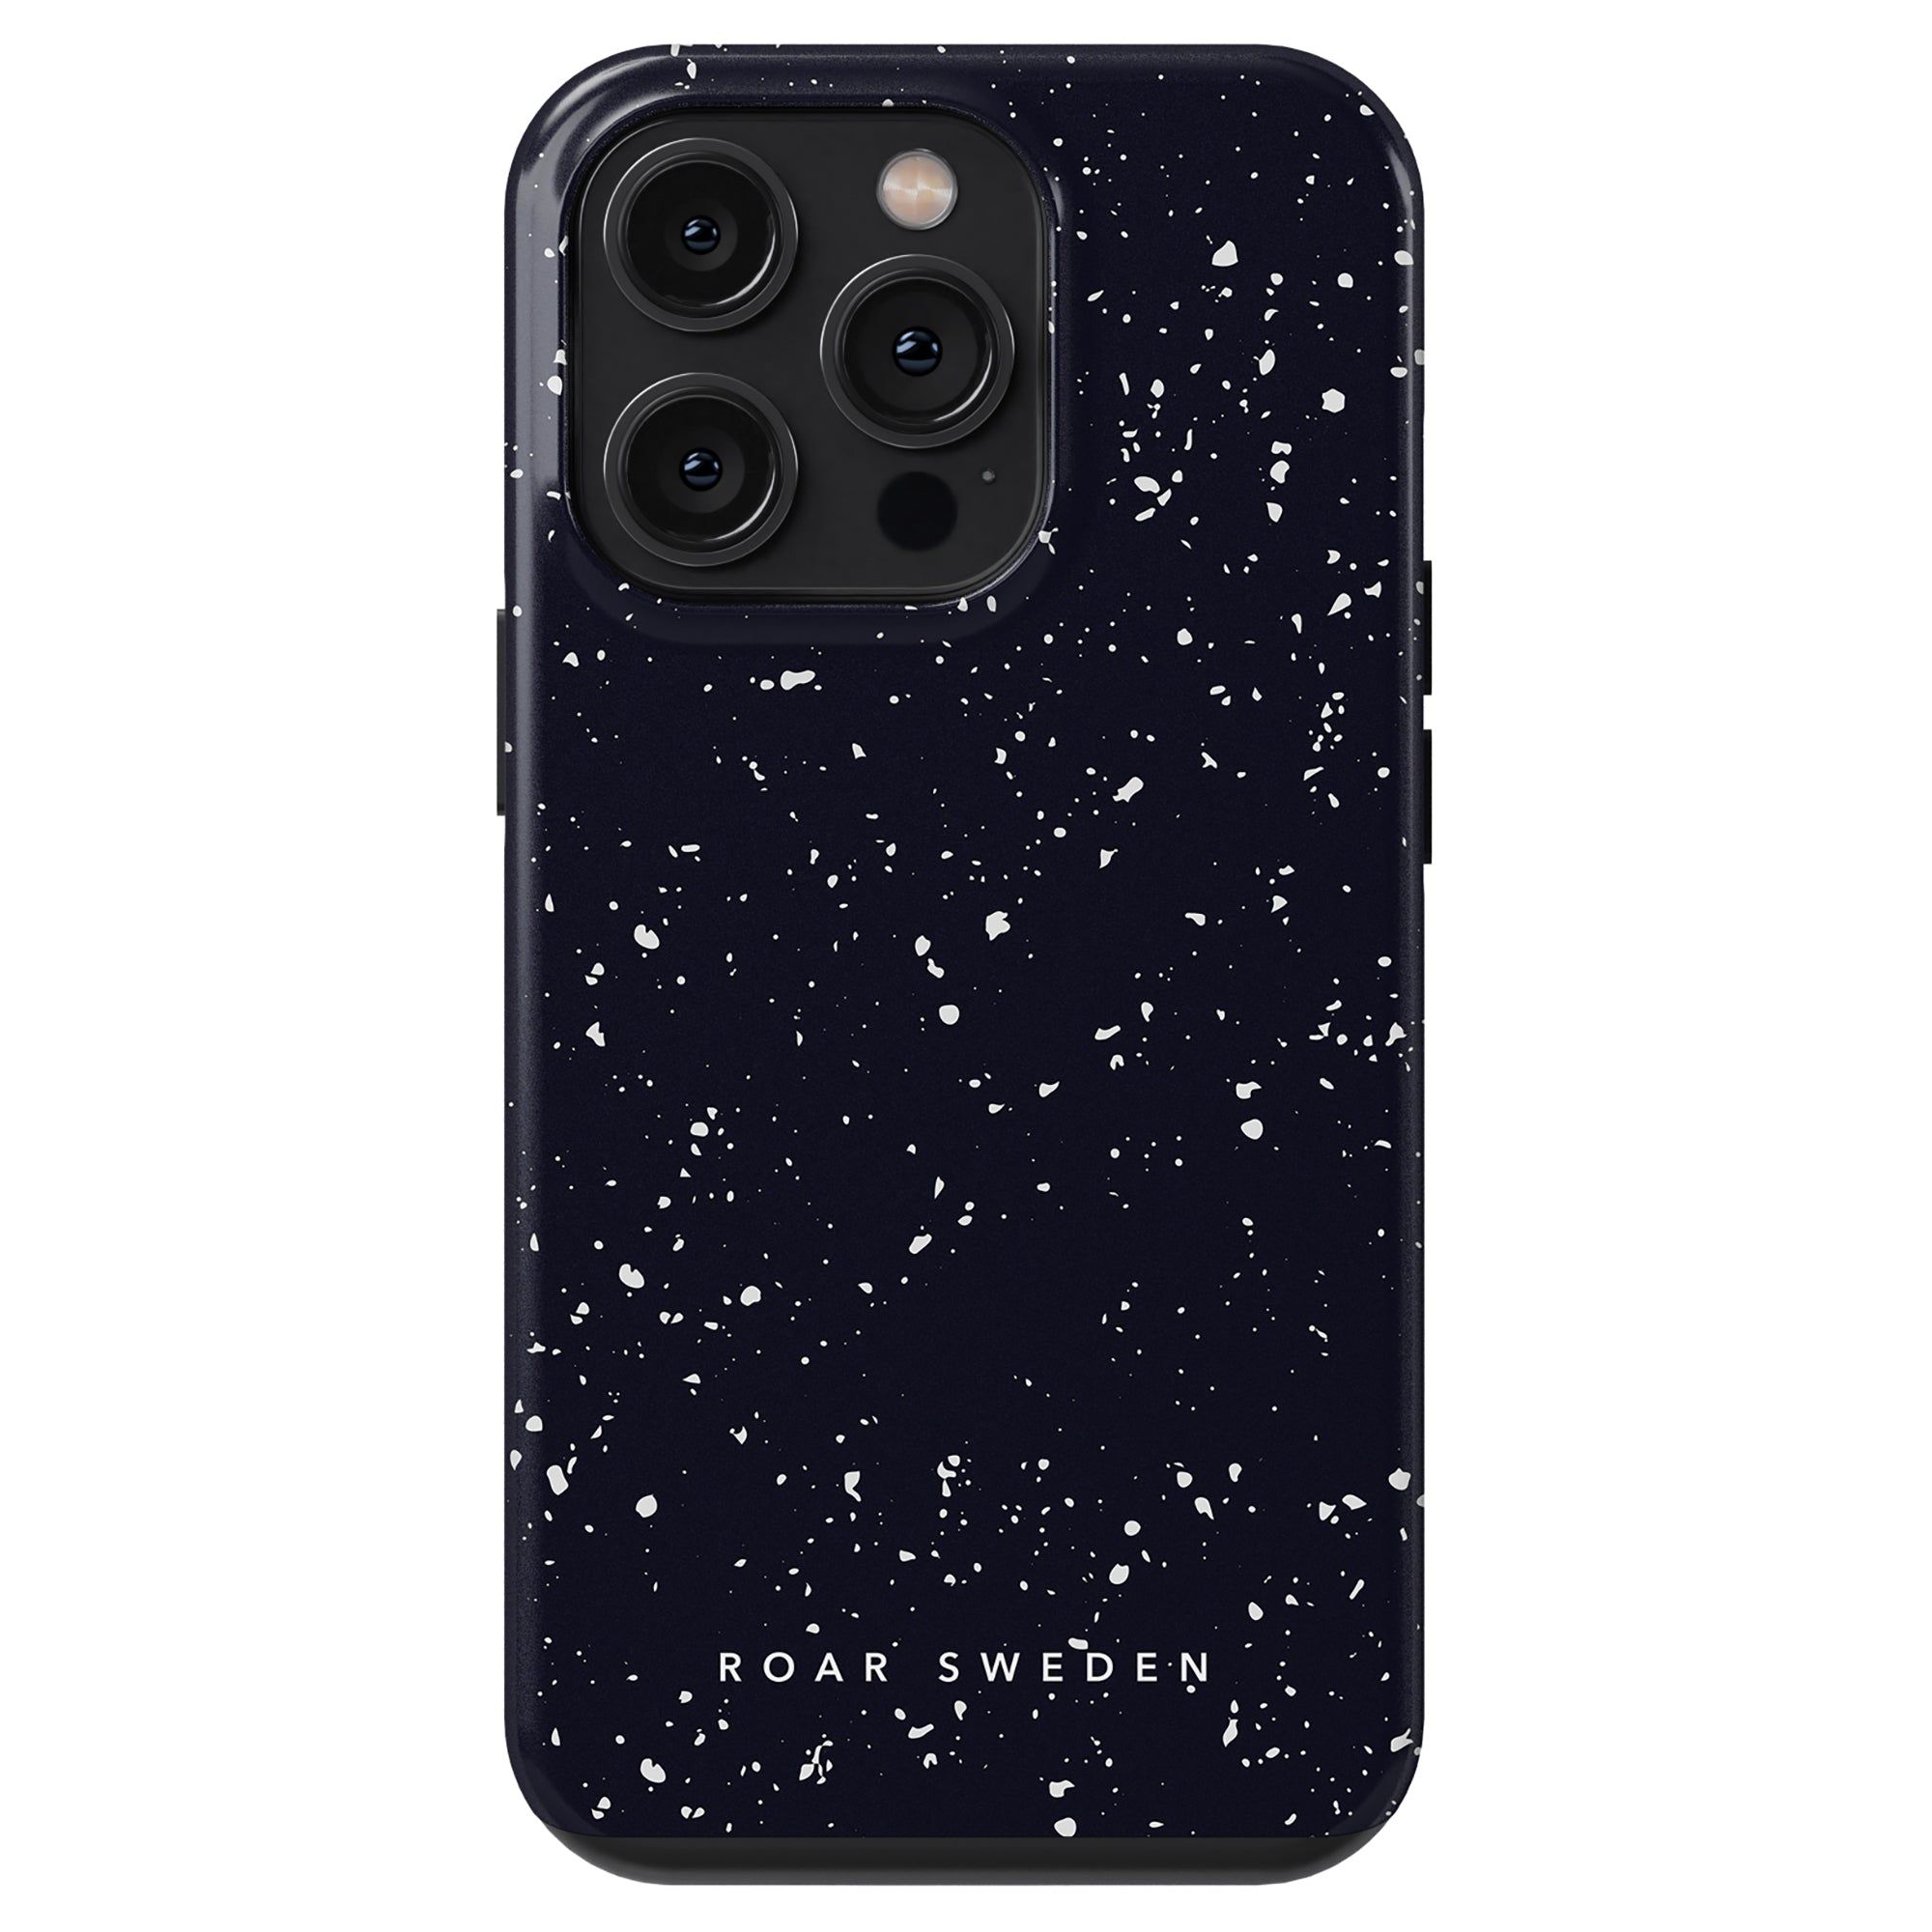 A smartphone with a Night Stars - Tough Case that has the text "roar sweden" on the bottom.